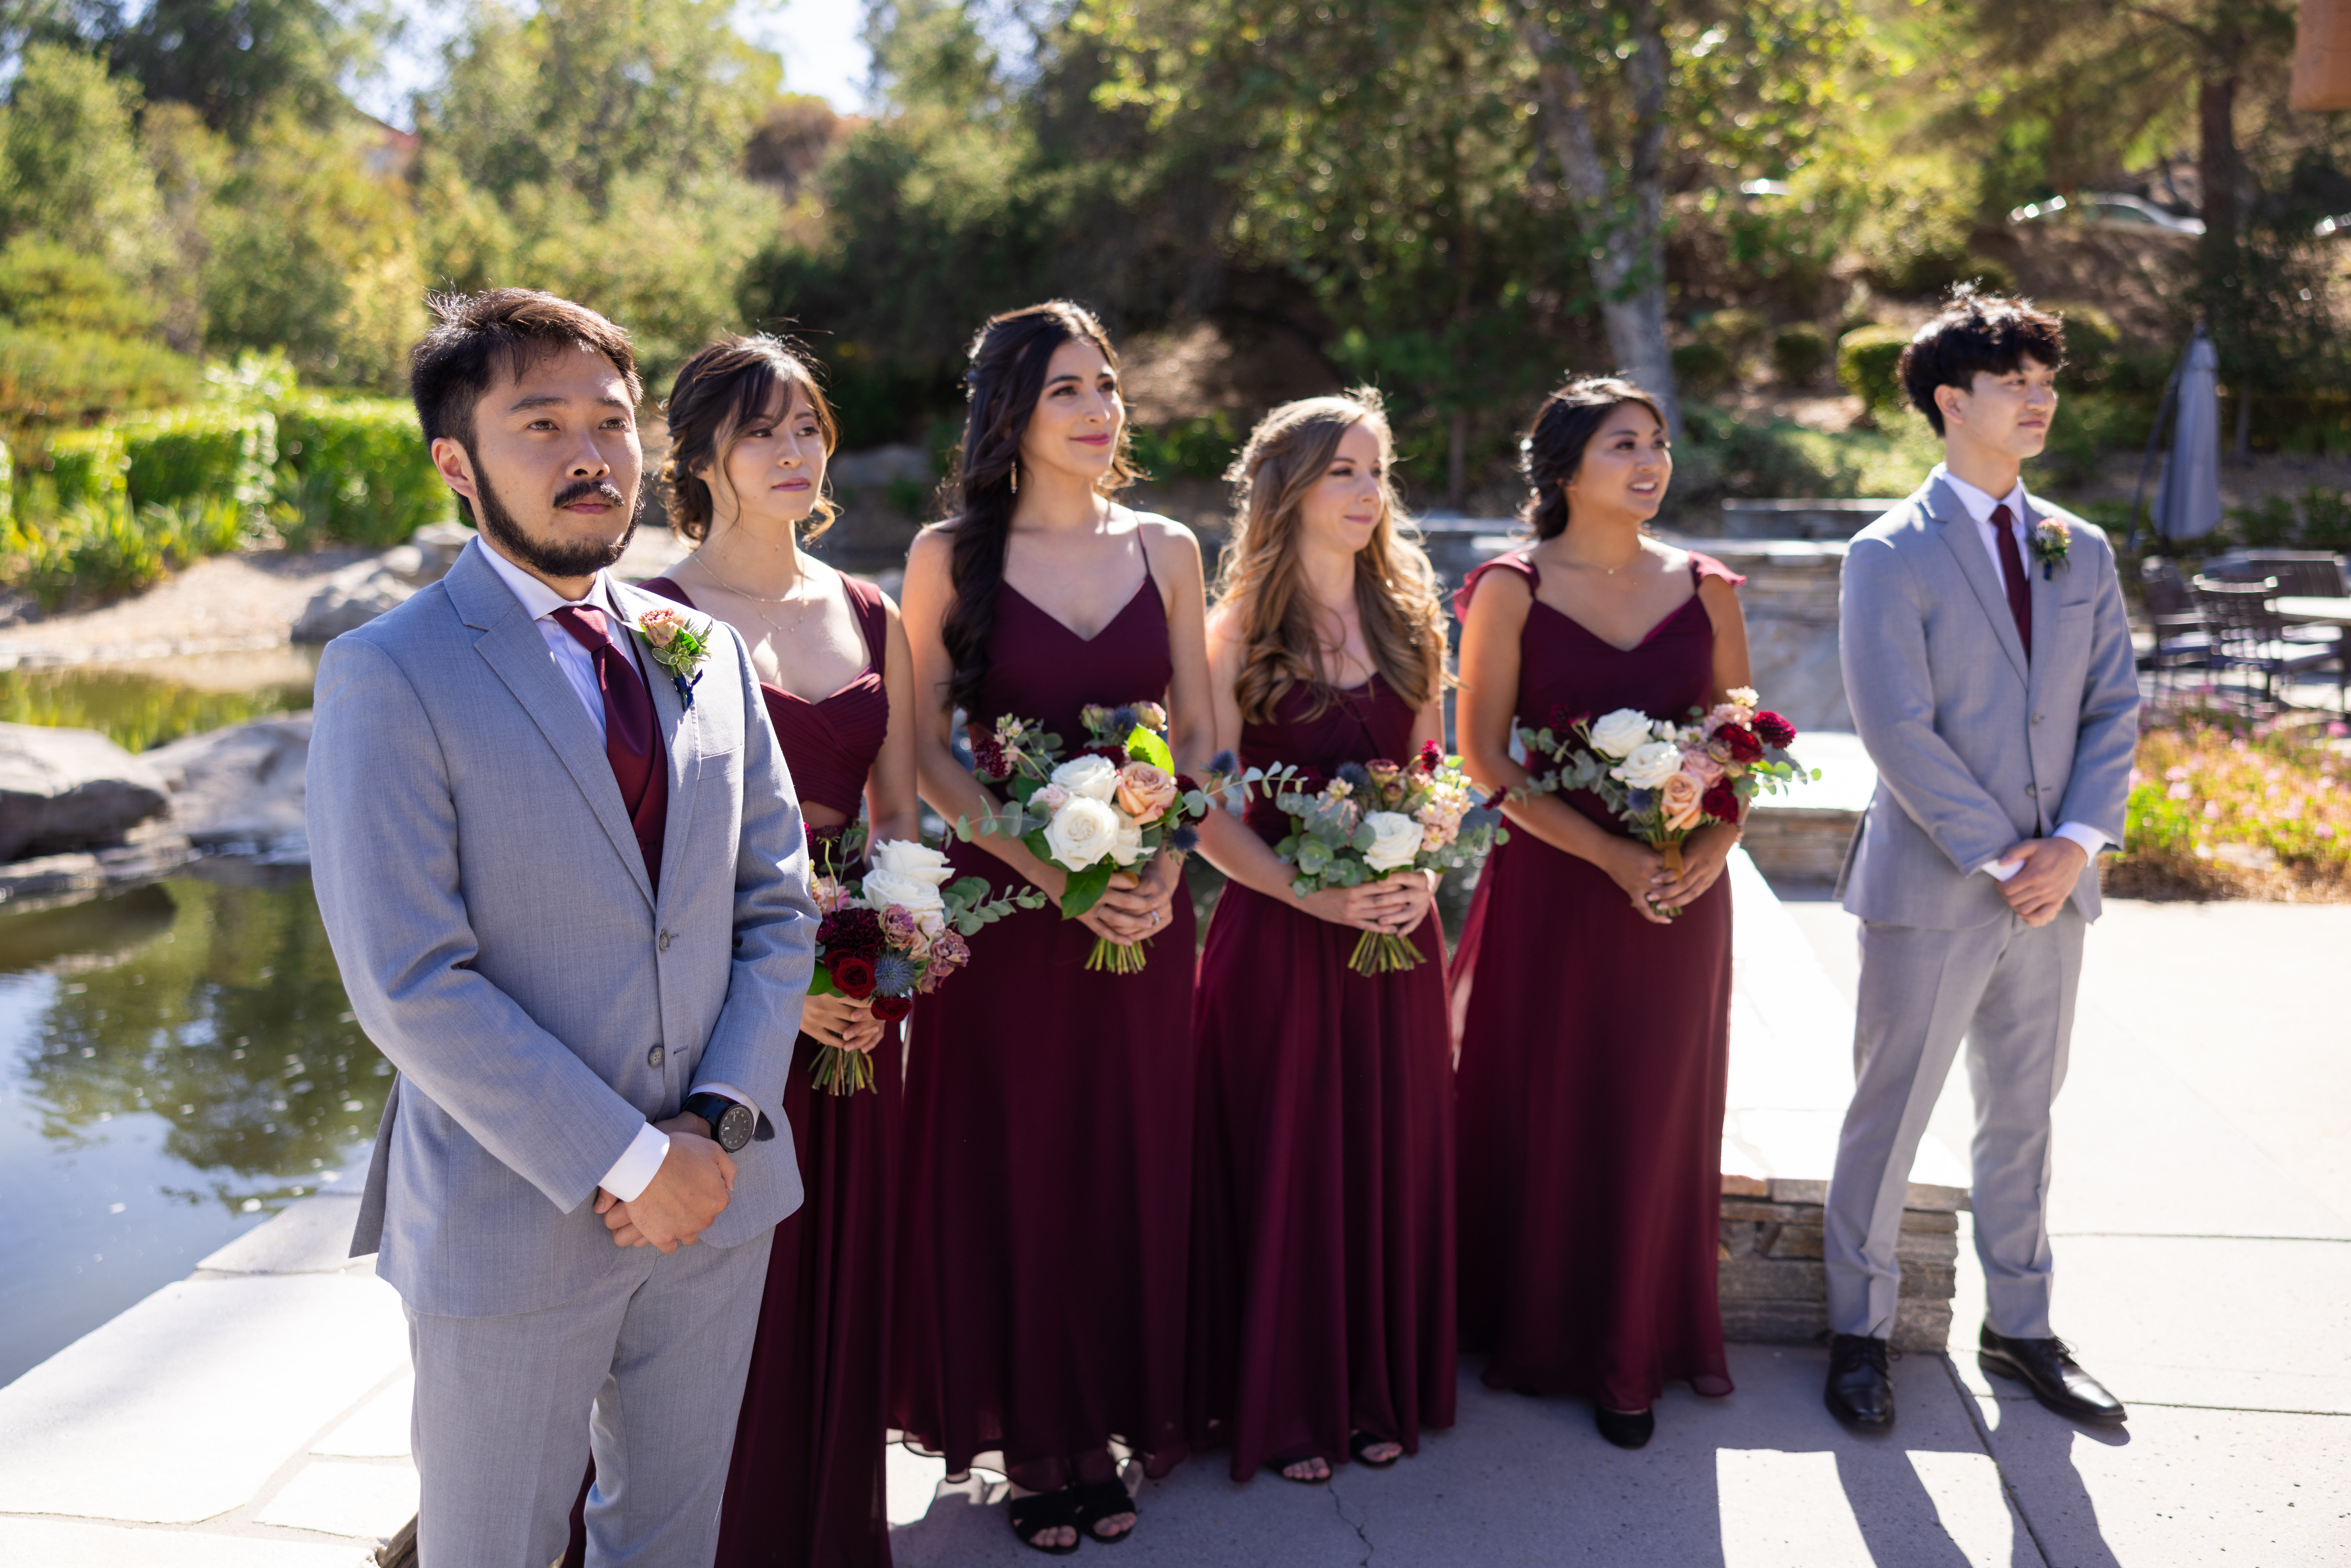 co-ed bridal party in maroon wait during wedding ceremony